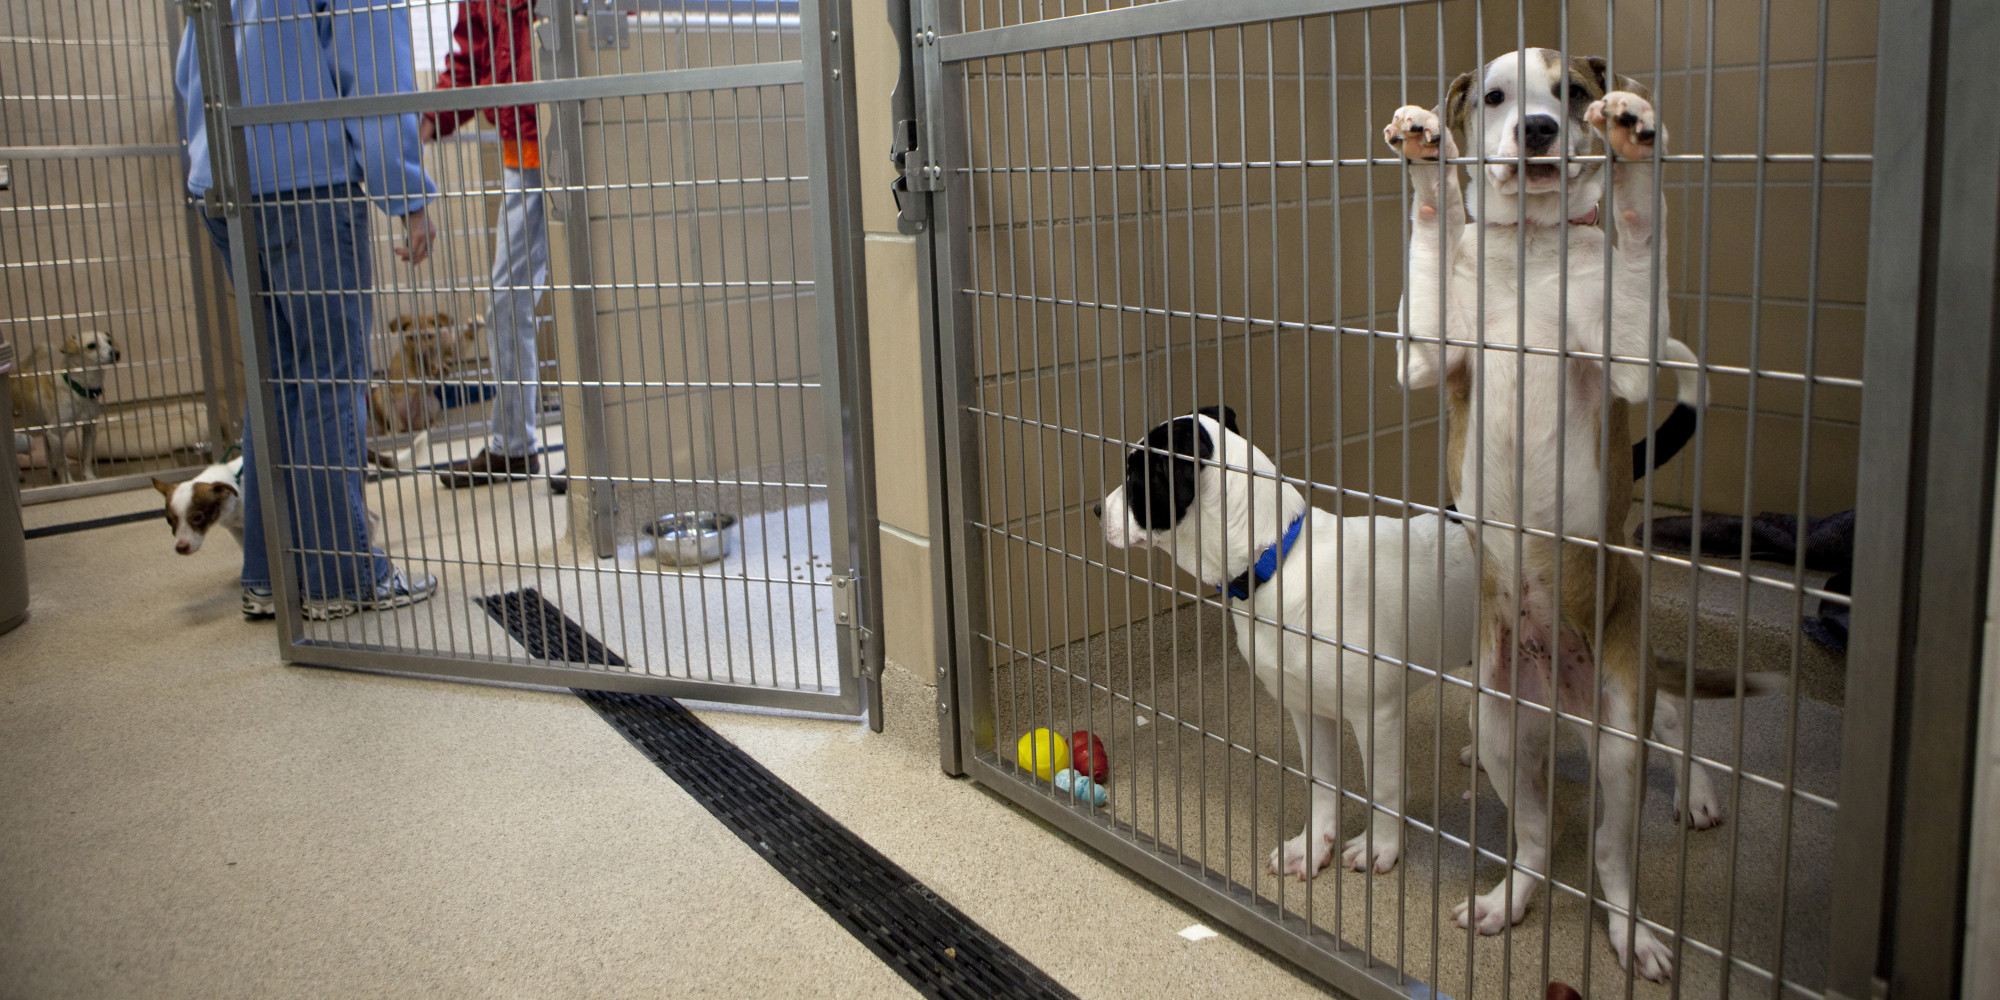 No-Kill Animal Sheltering Is Coming Soon to a Community Near You